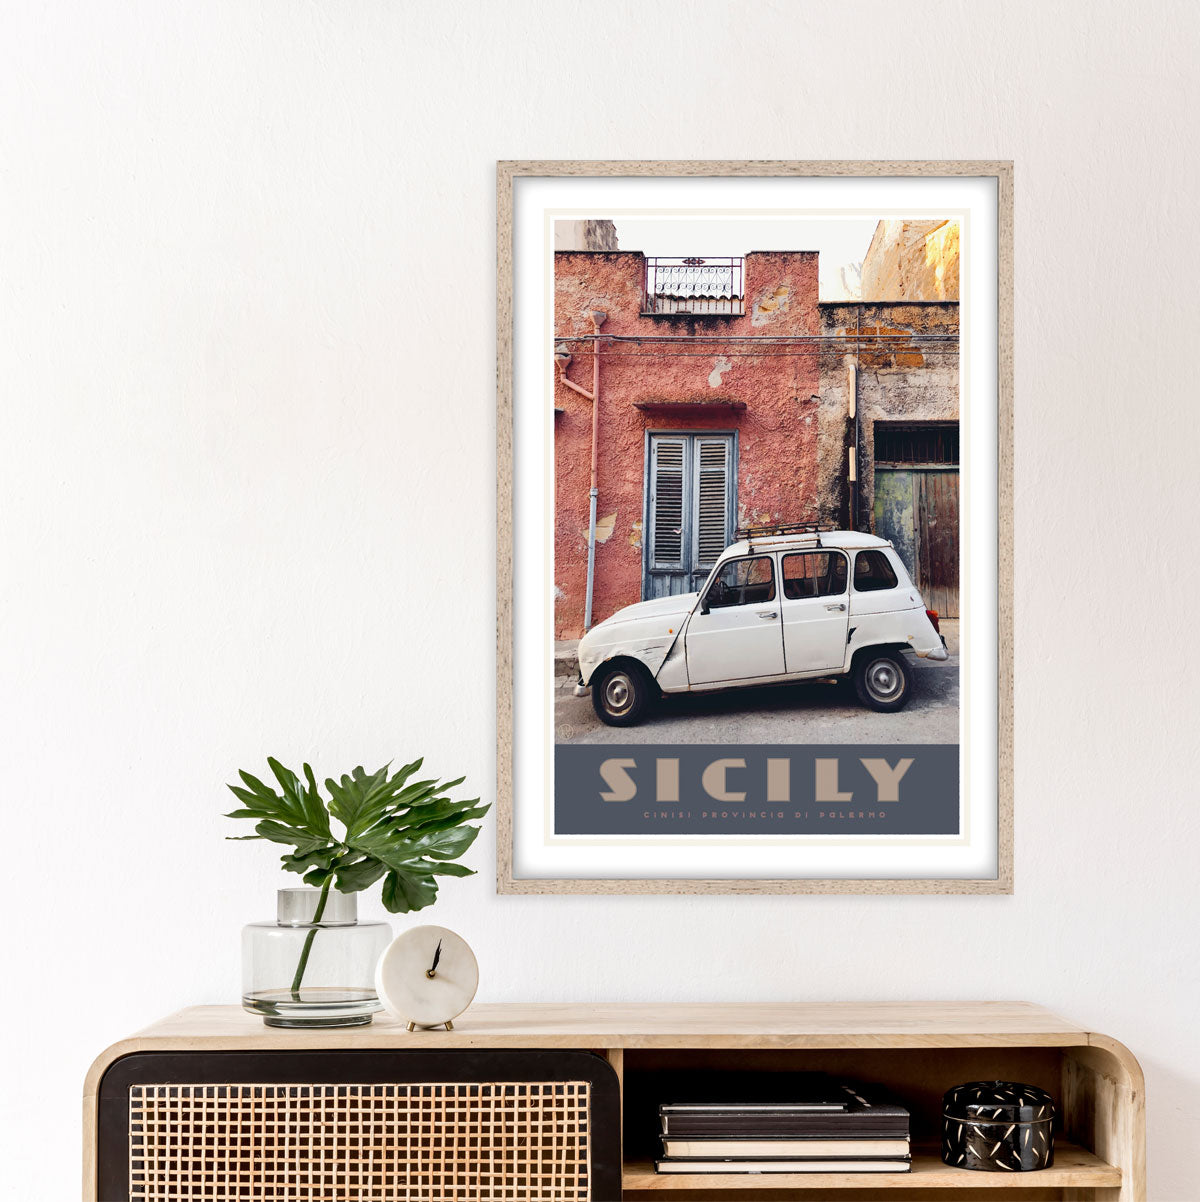 Sicily vintage travel retro print by Places We Luv